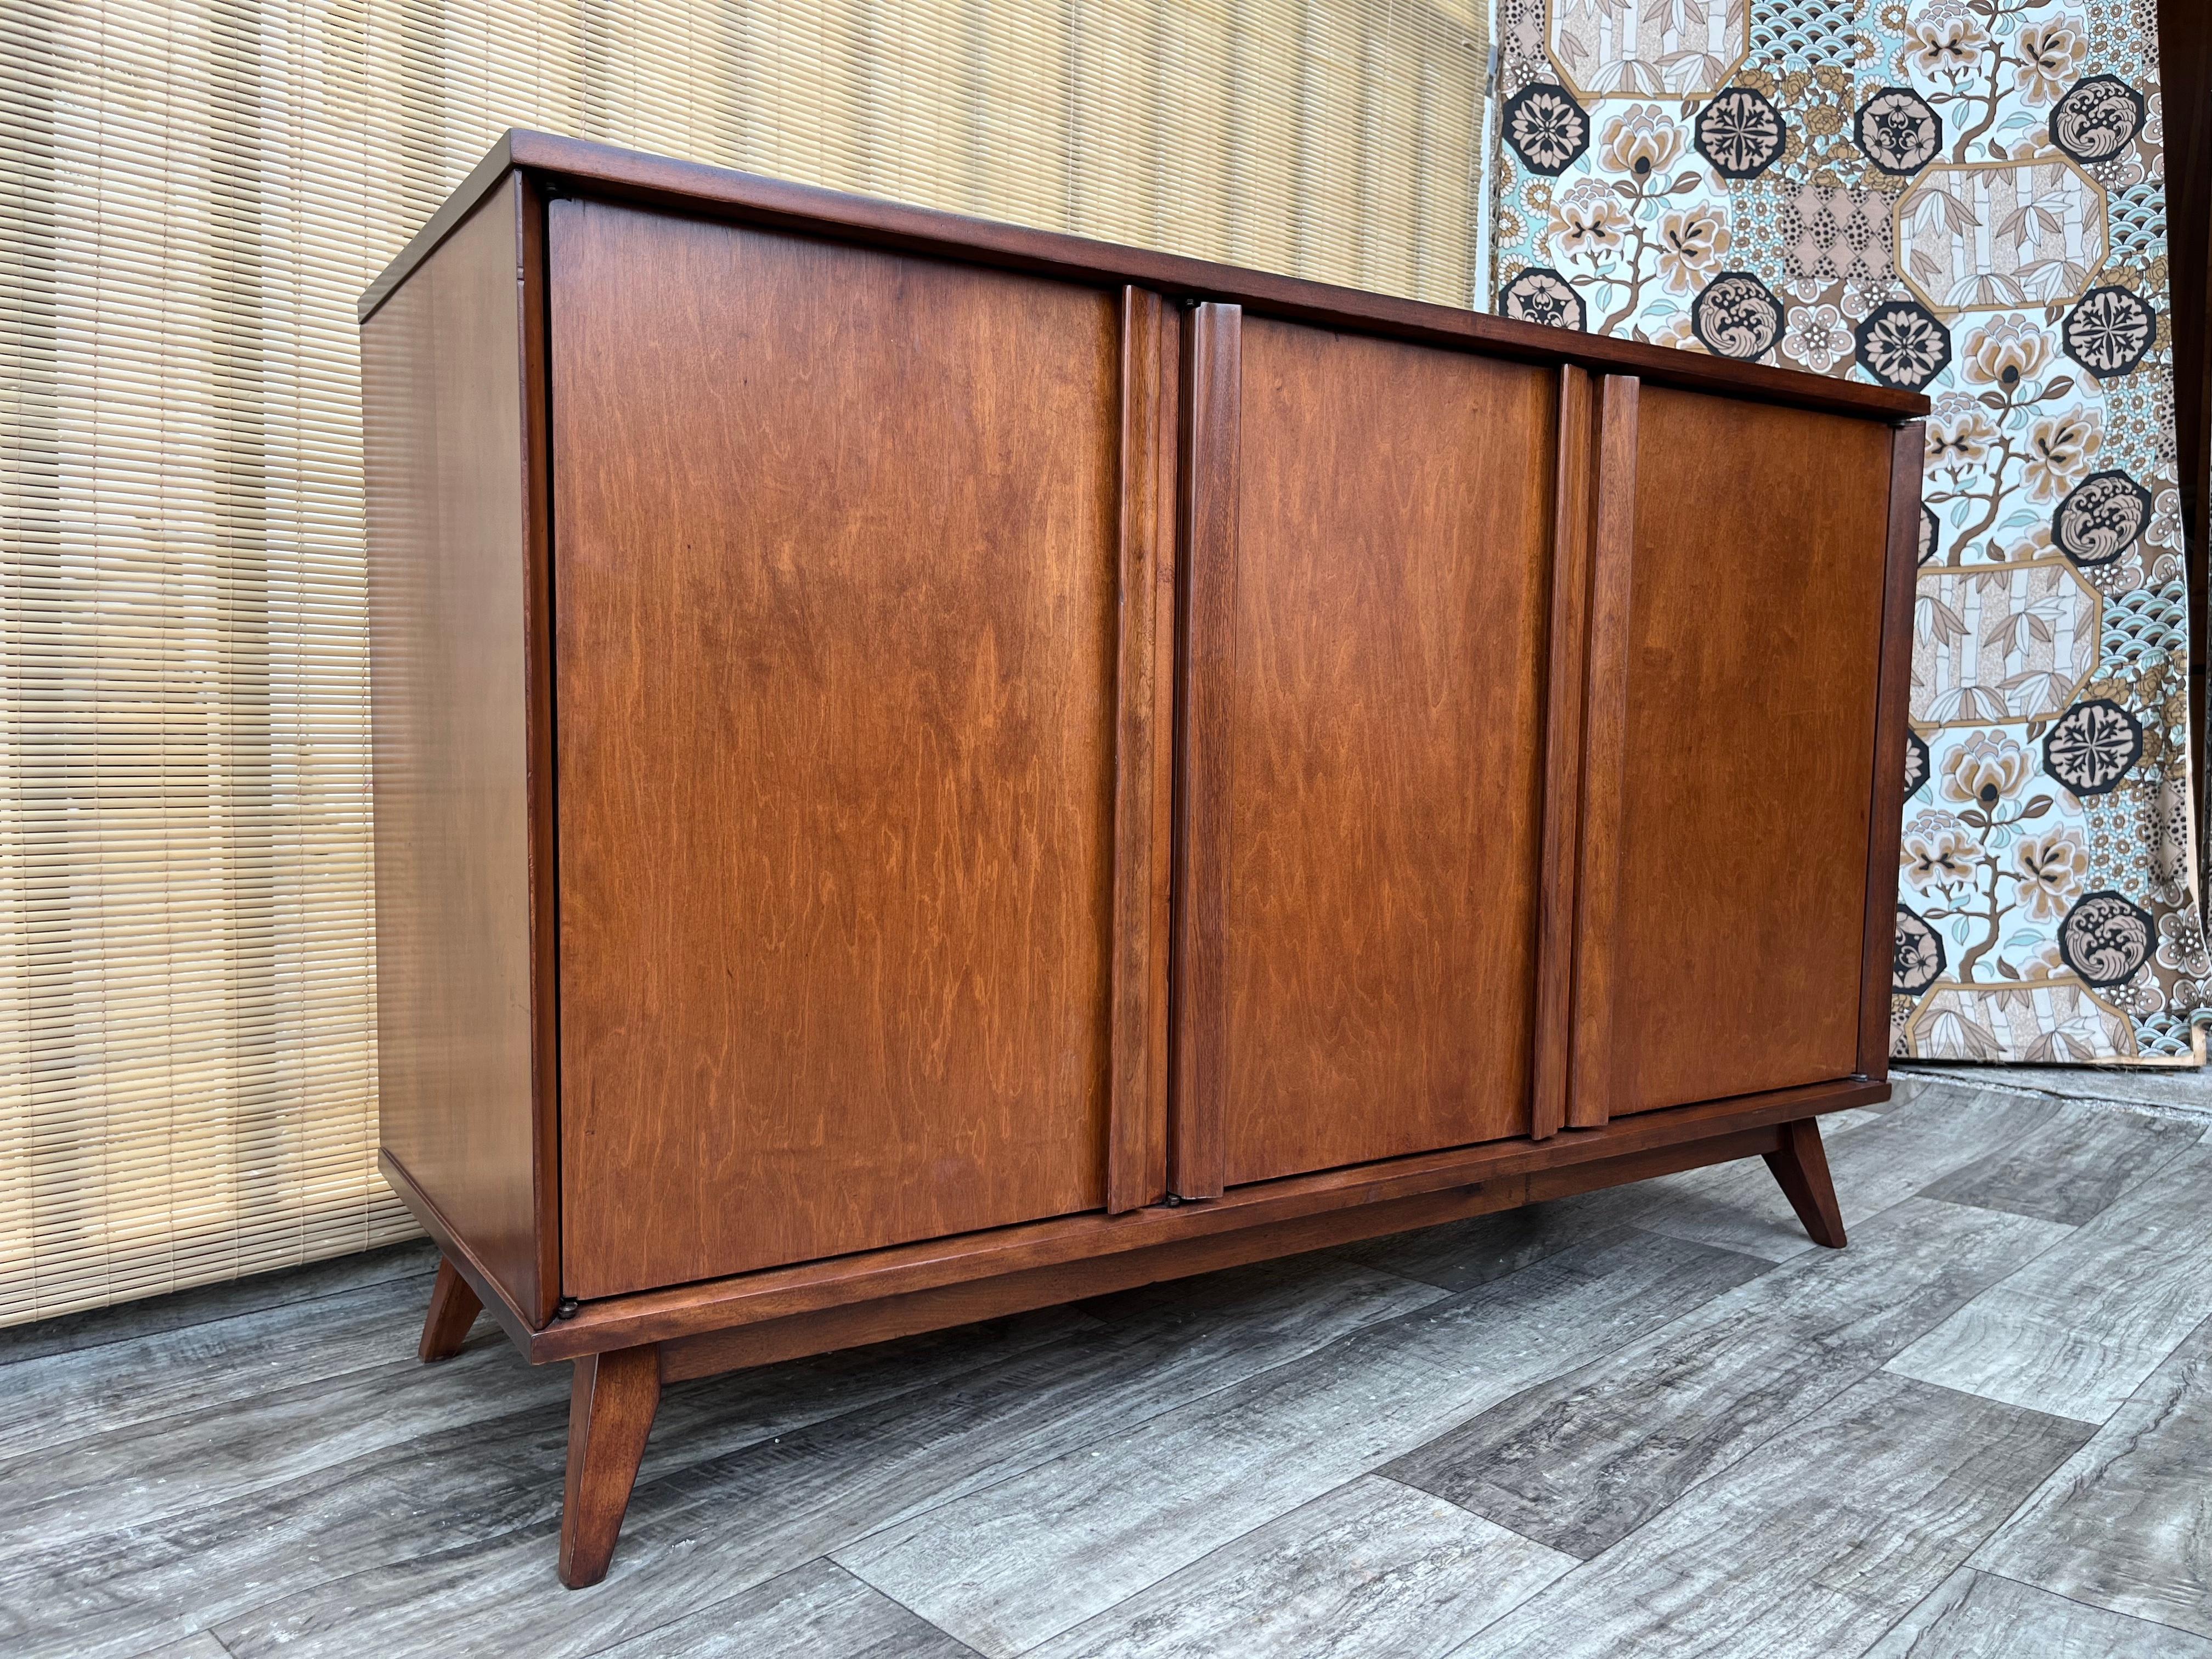 Wood Fully Restored Mid Century Modern Sideboard Credenza. Circa 1960s. For Sale